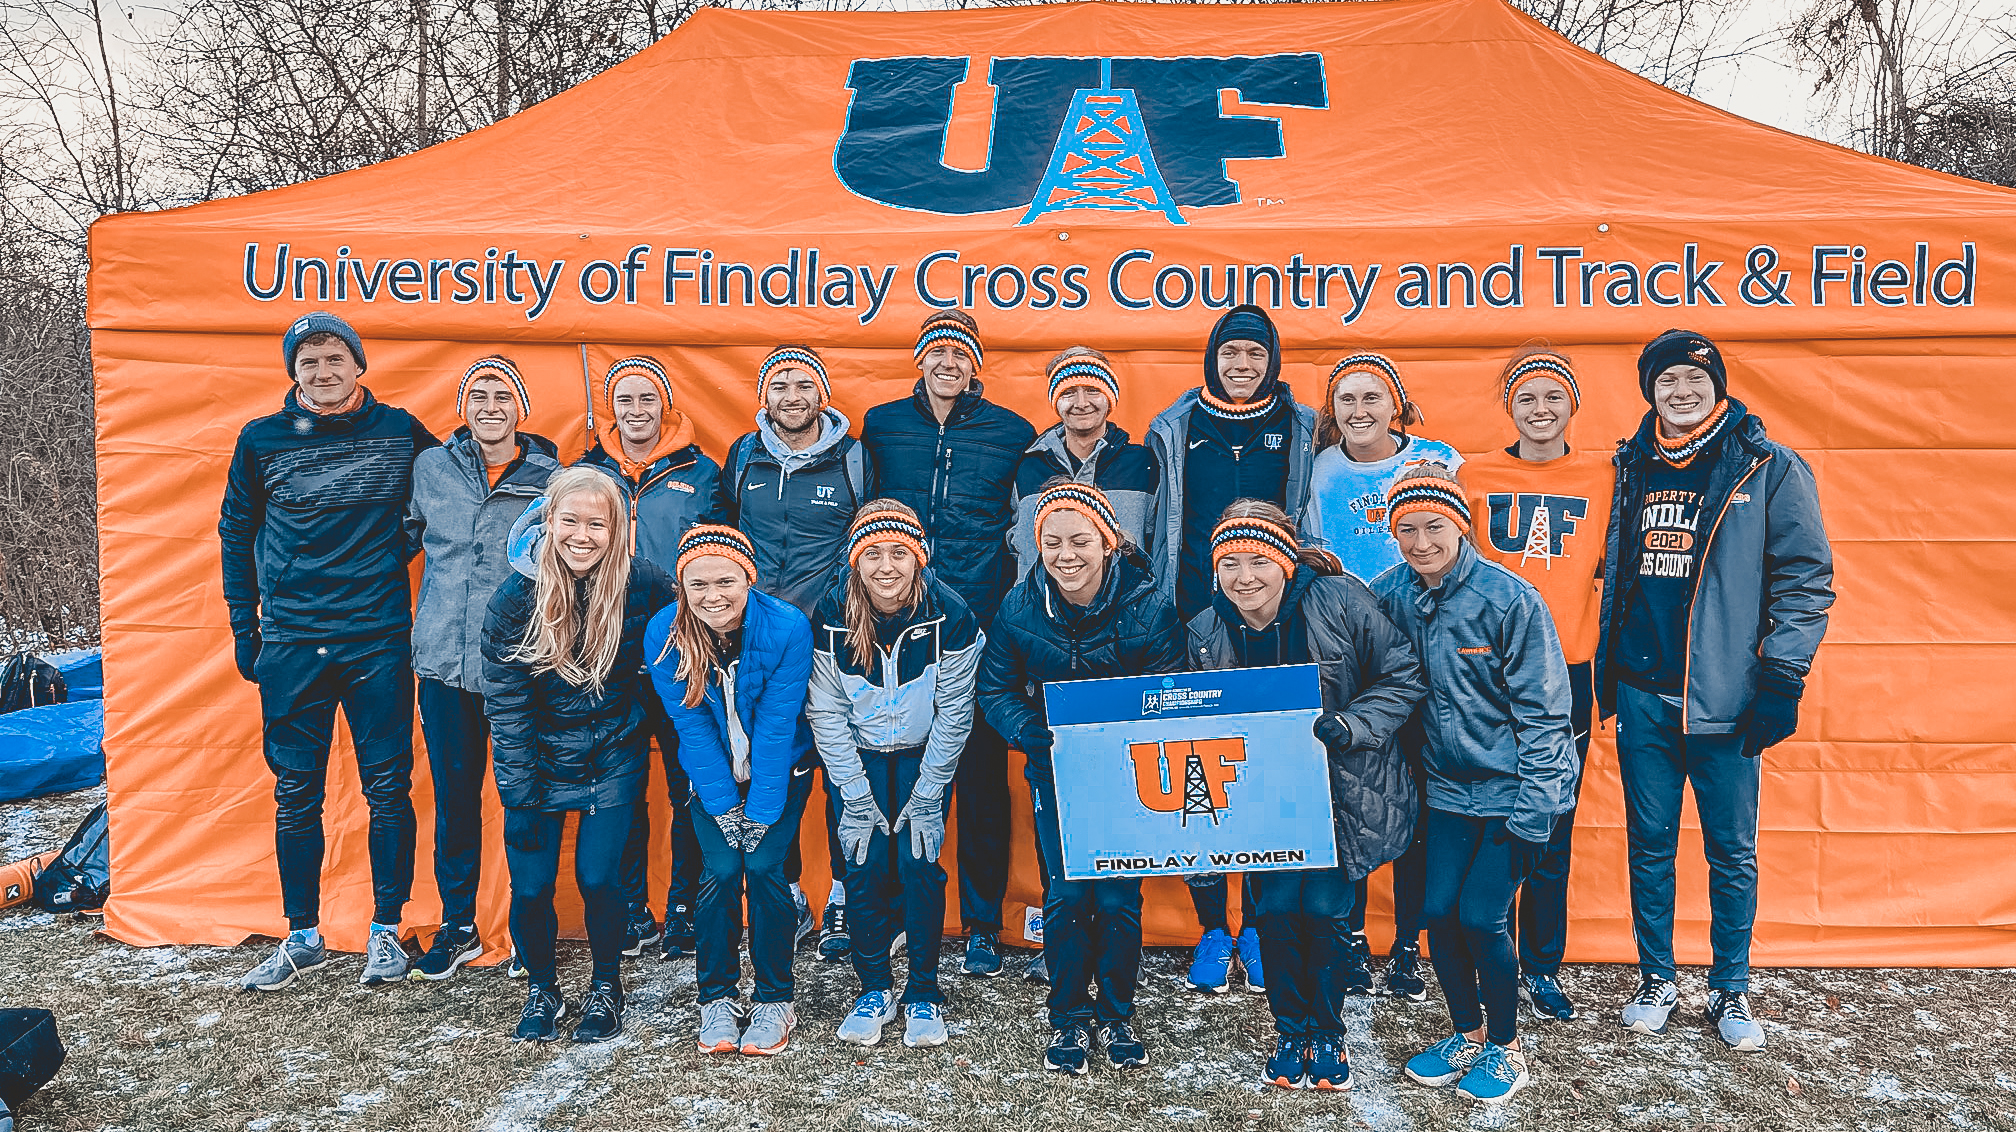 cross country team poses in front of team tent